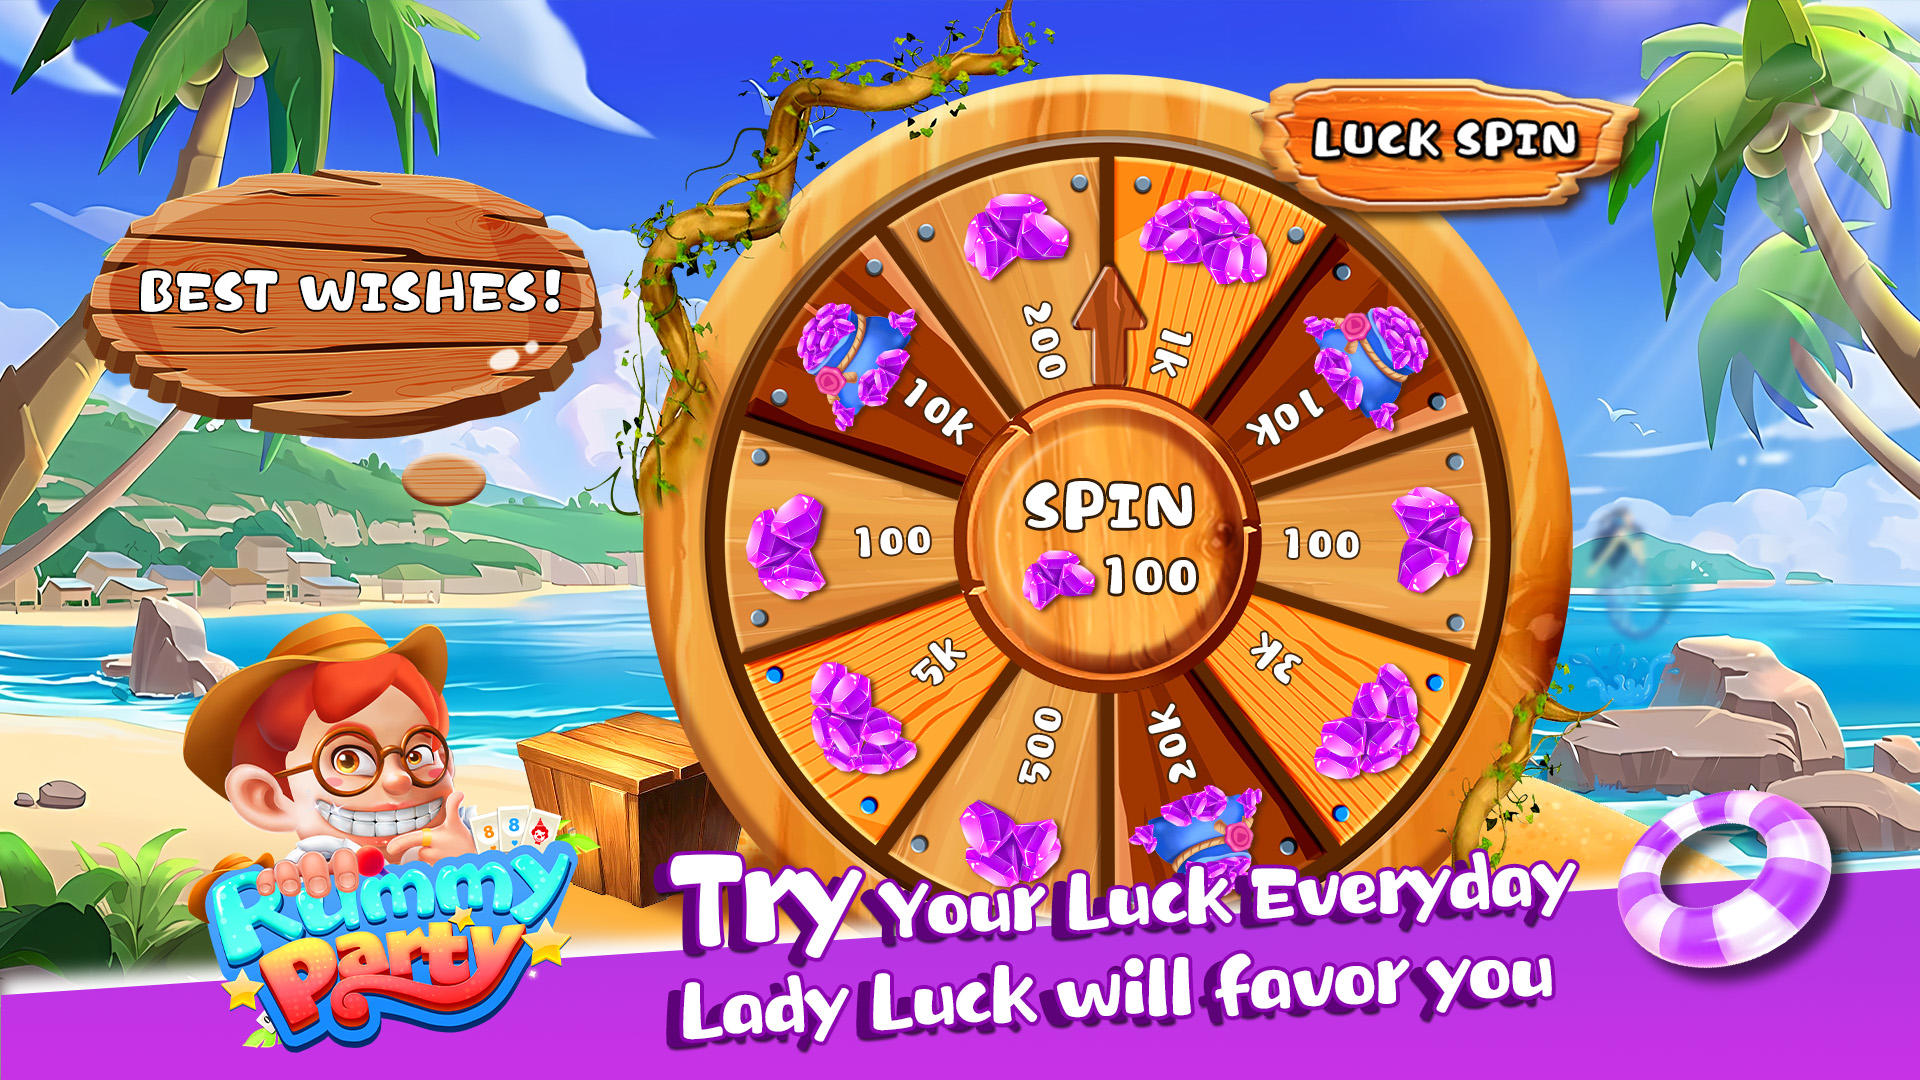 Screenshot of Rummy Party